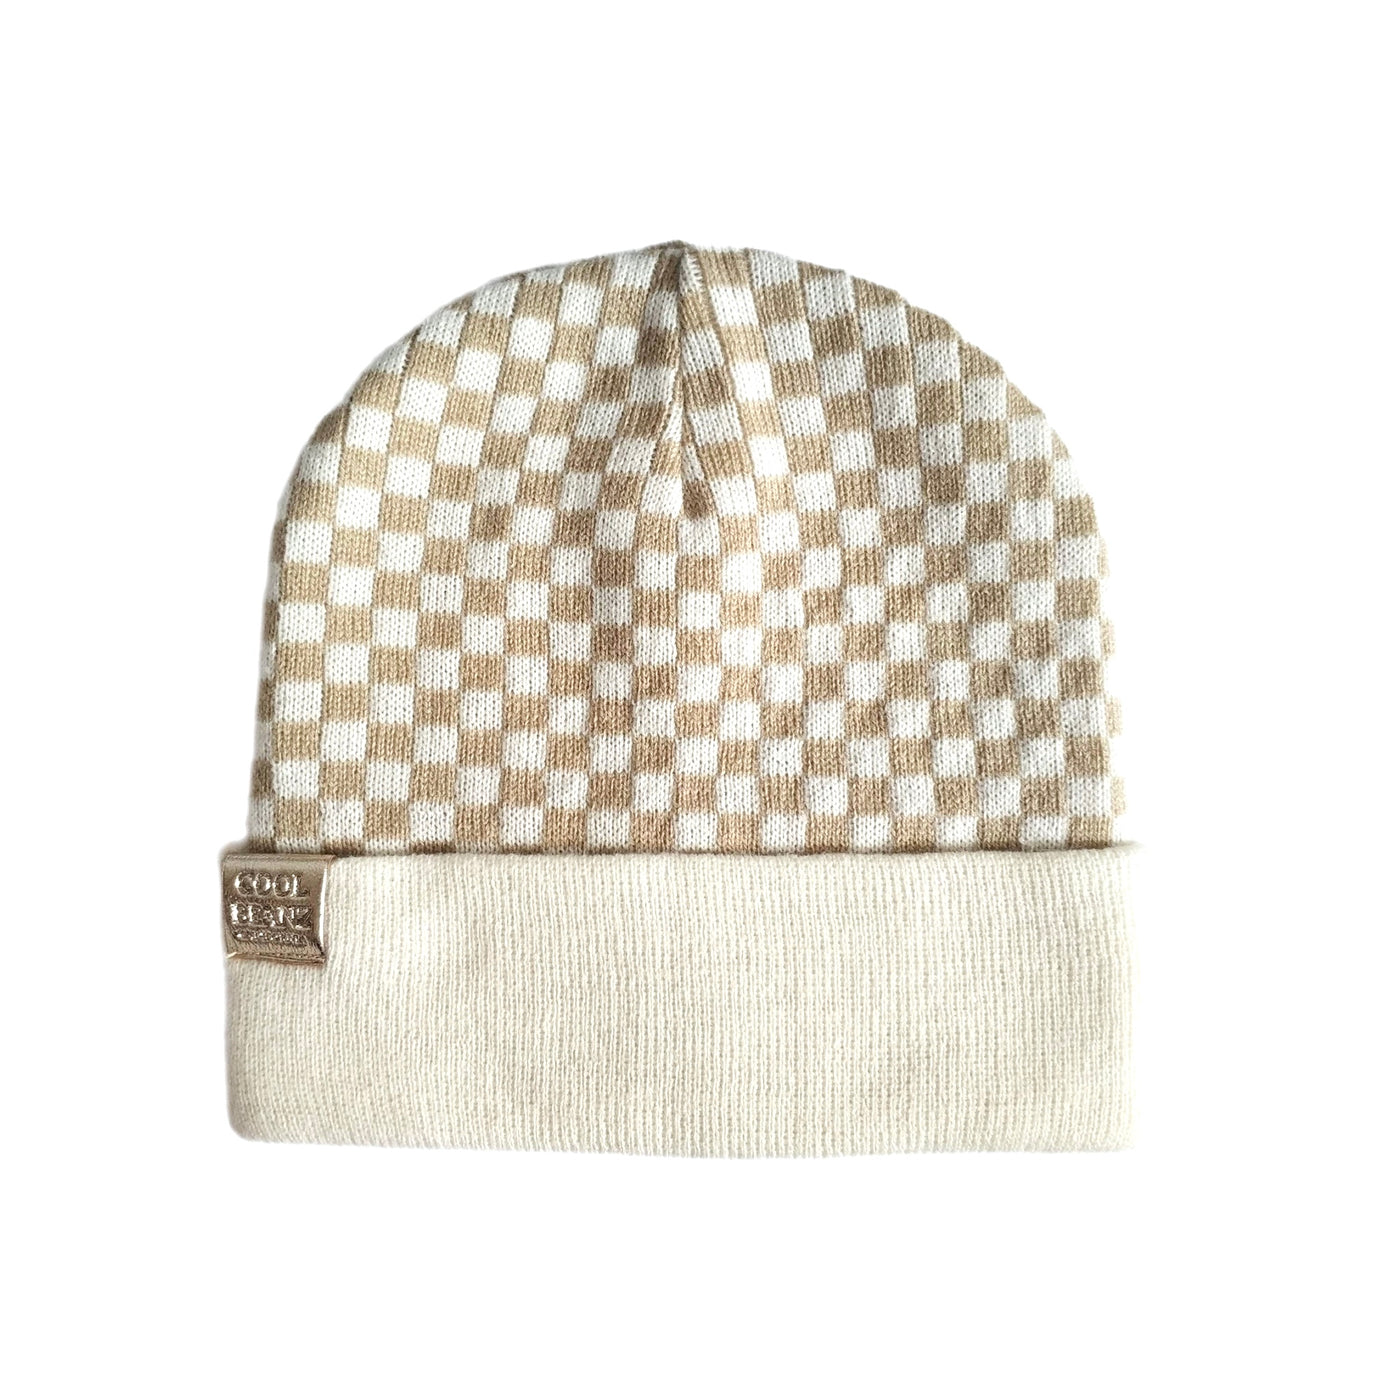 Check Yourself Reversible Beanie - Beige